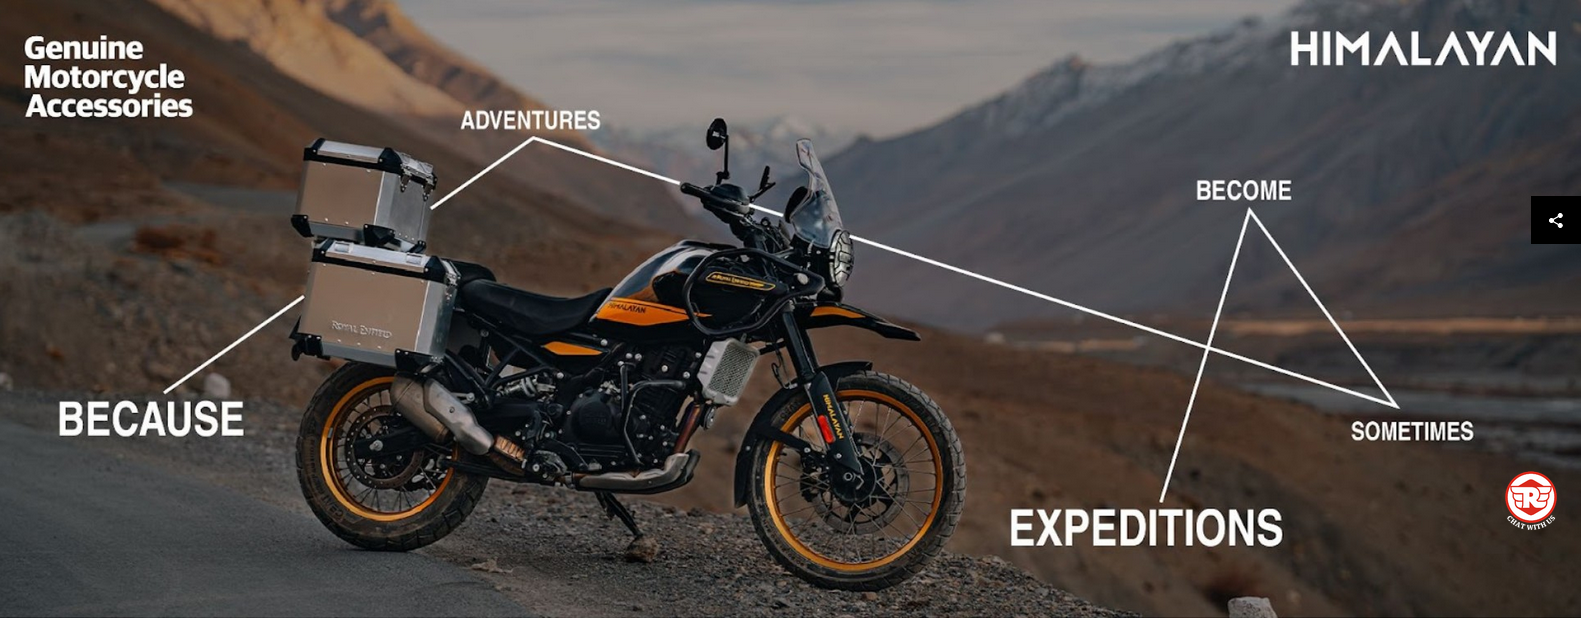 himalayan 450 Accessories .png